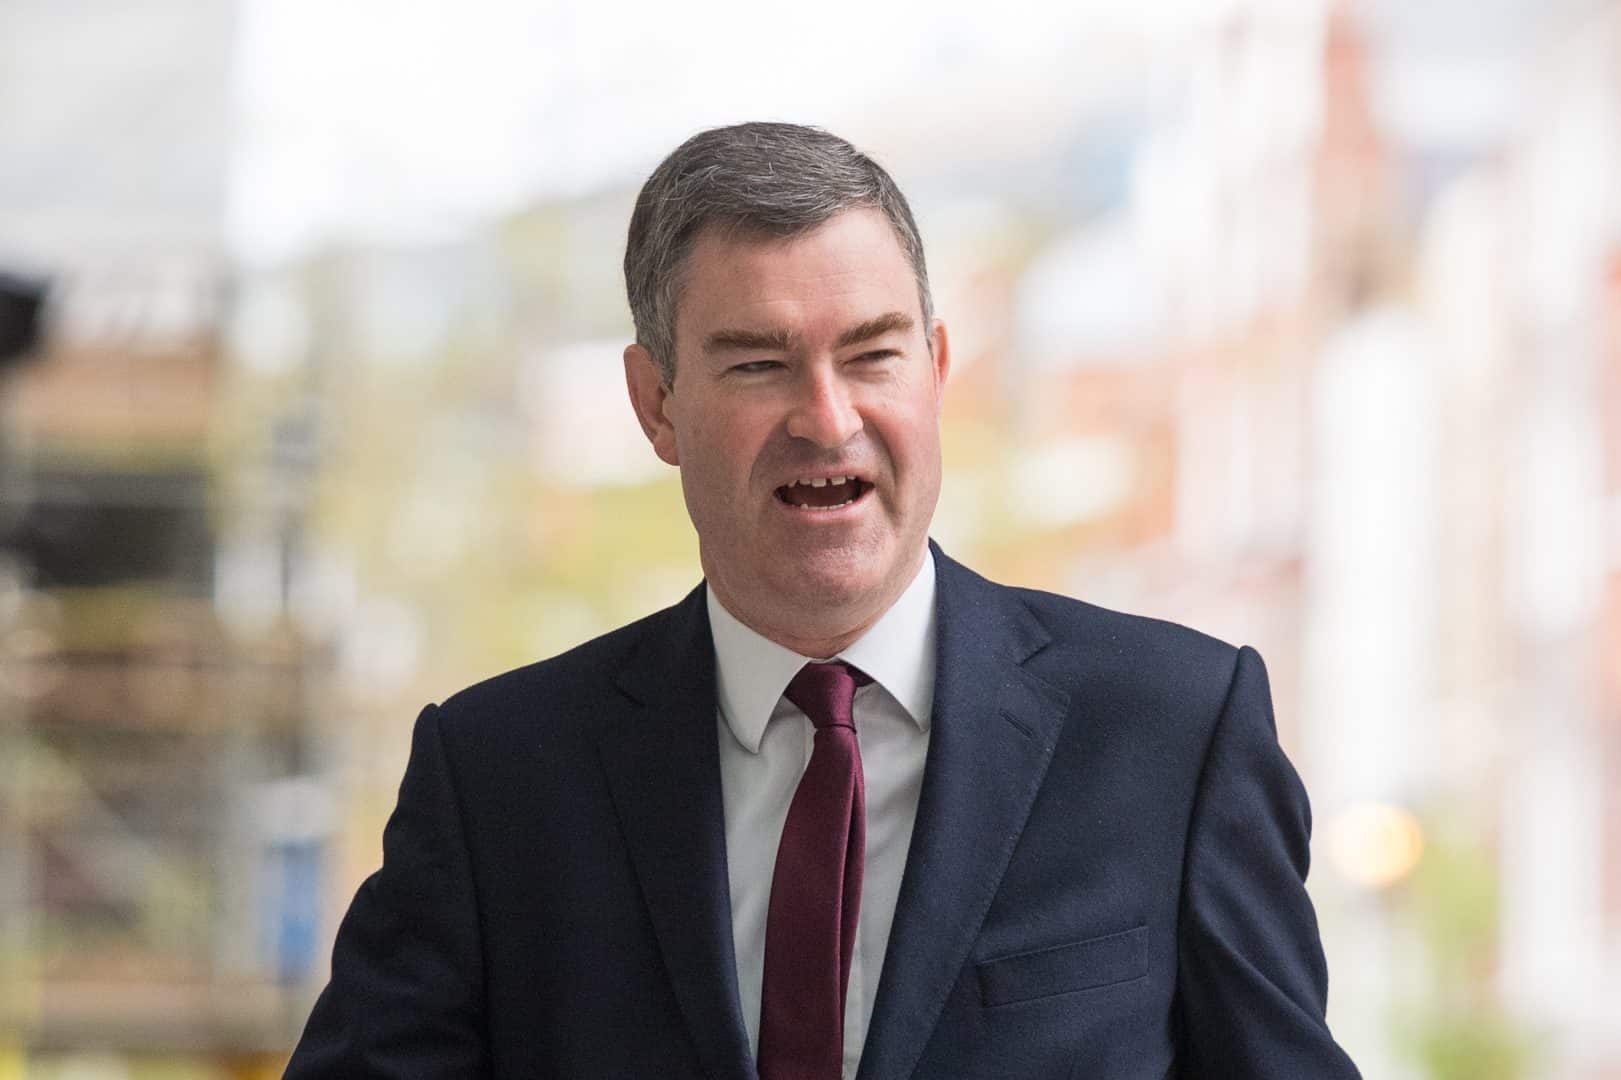 Former Conservative minister Gauke warns Tory majority will lead to ‘disastrous’ no-deal Brexit